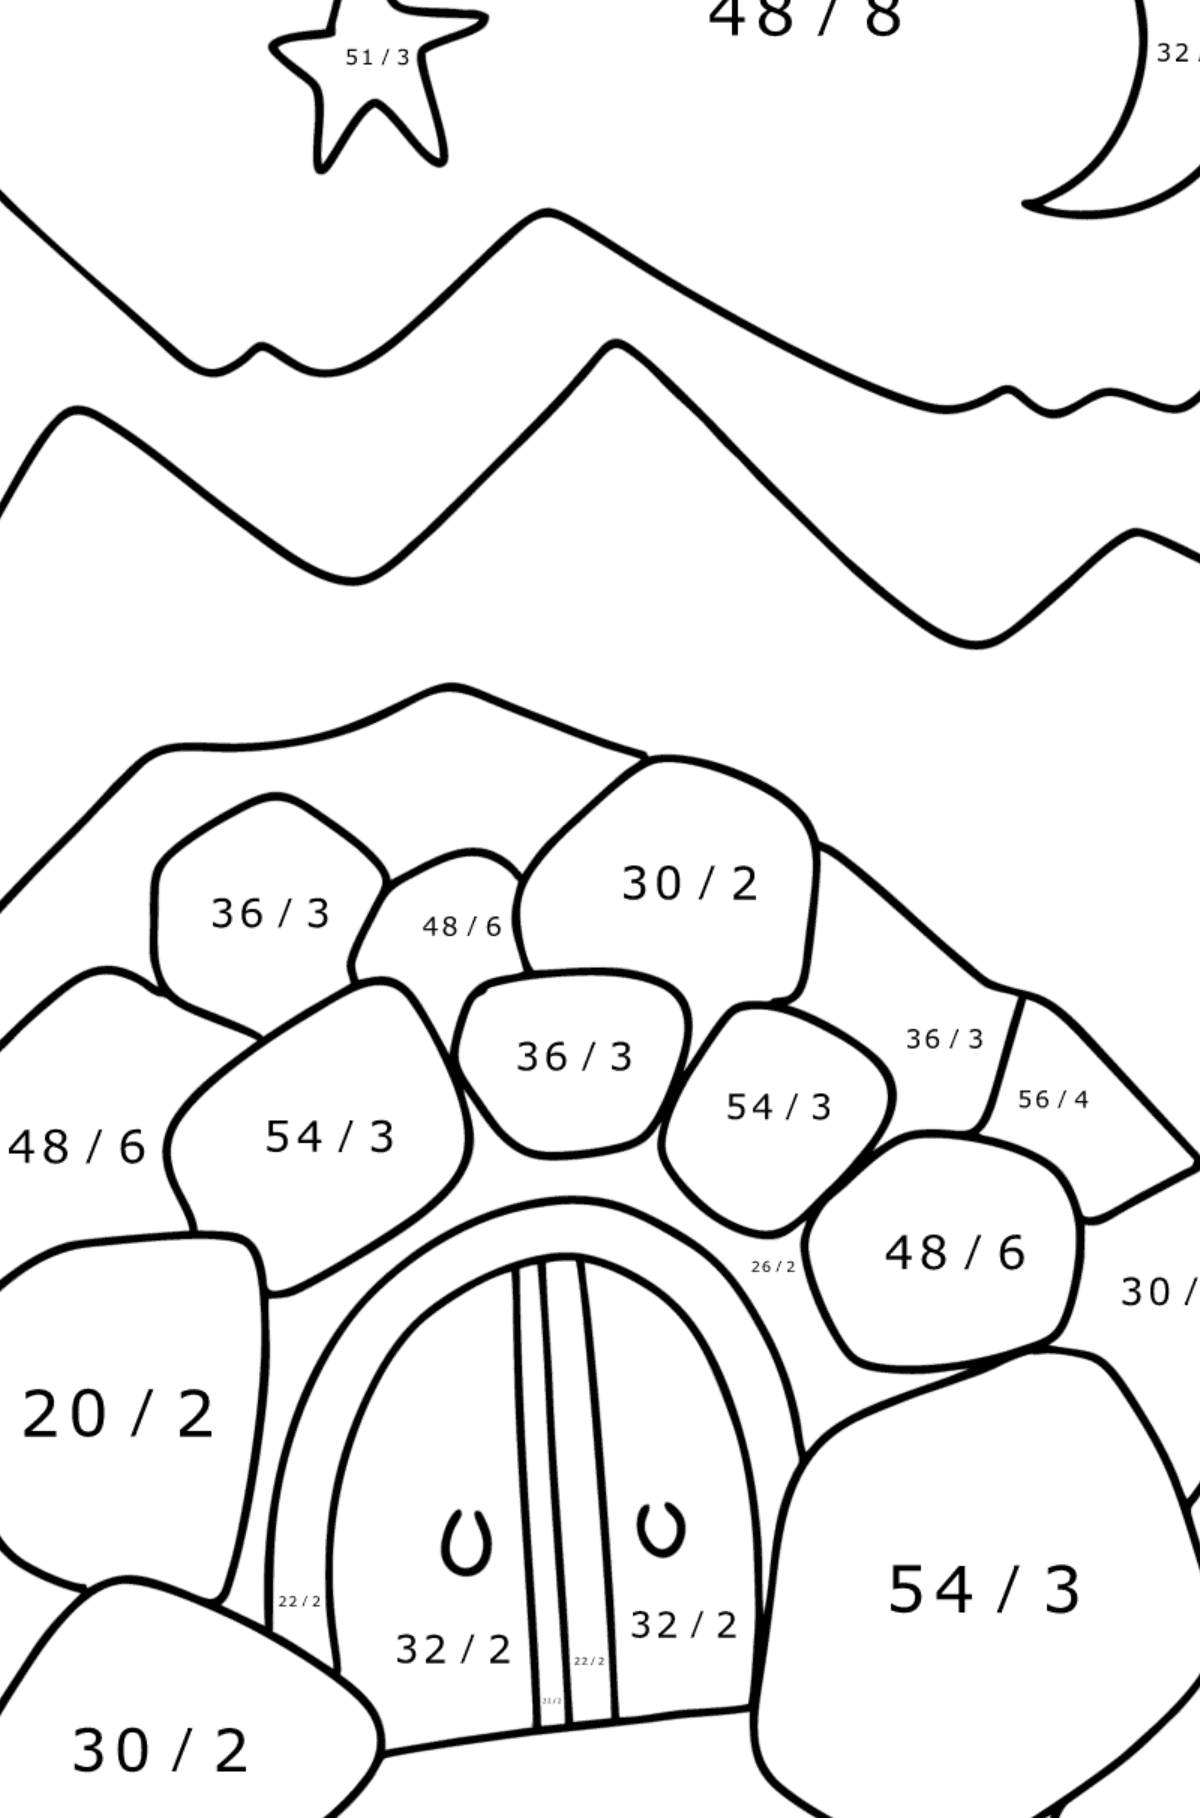 Ali Baba Cave coloring page - Math Coloring - Division for Kids